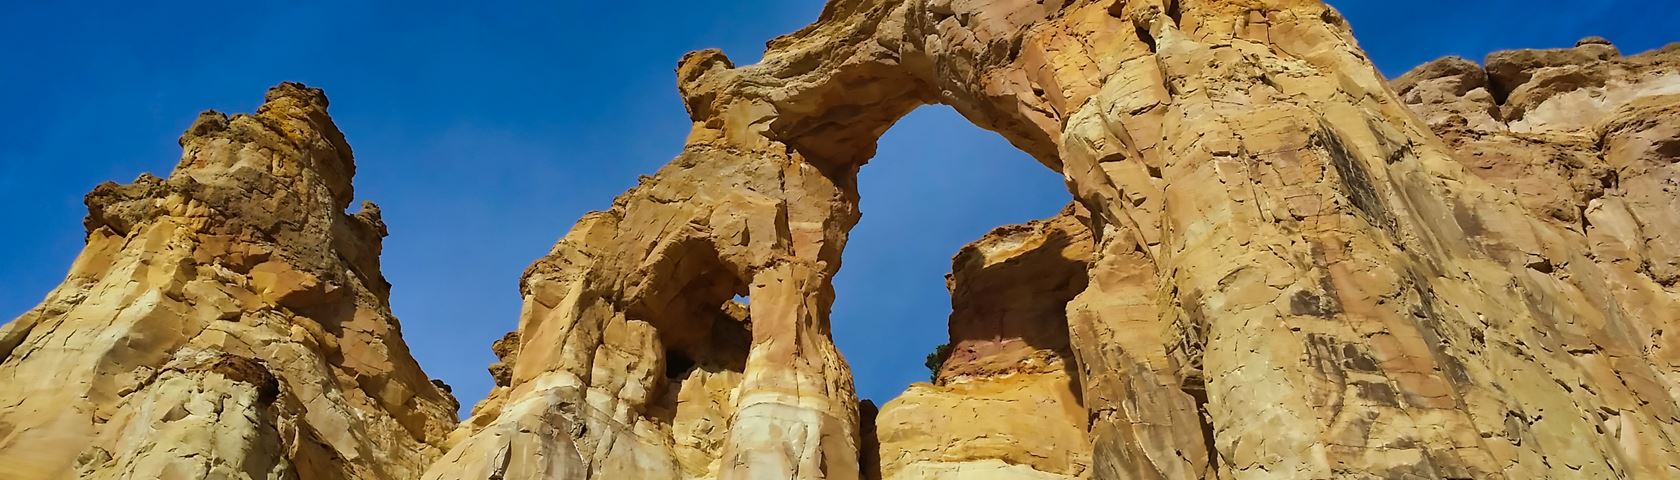 More from Arches National Park